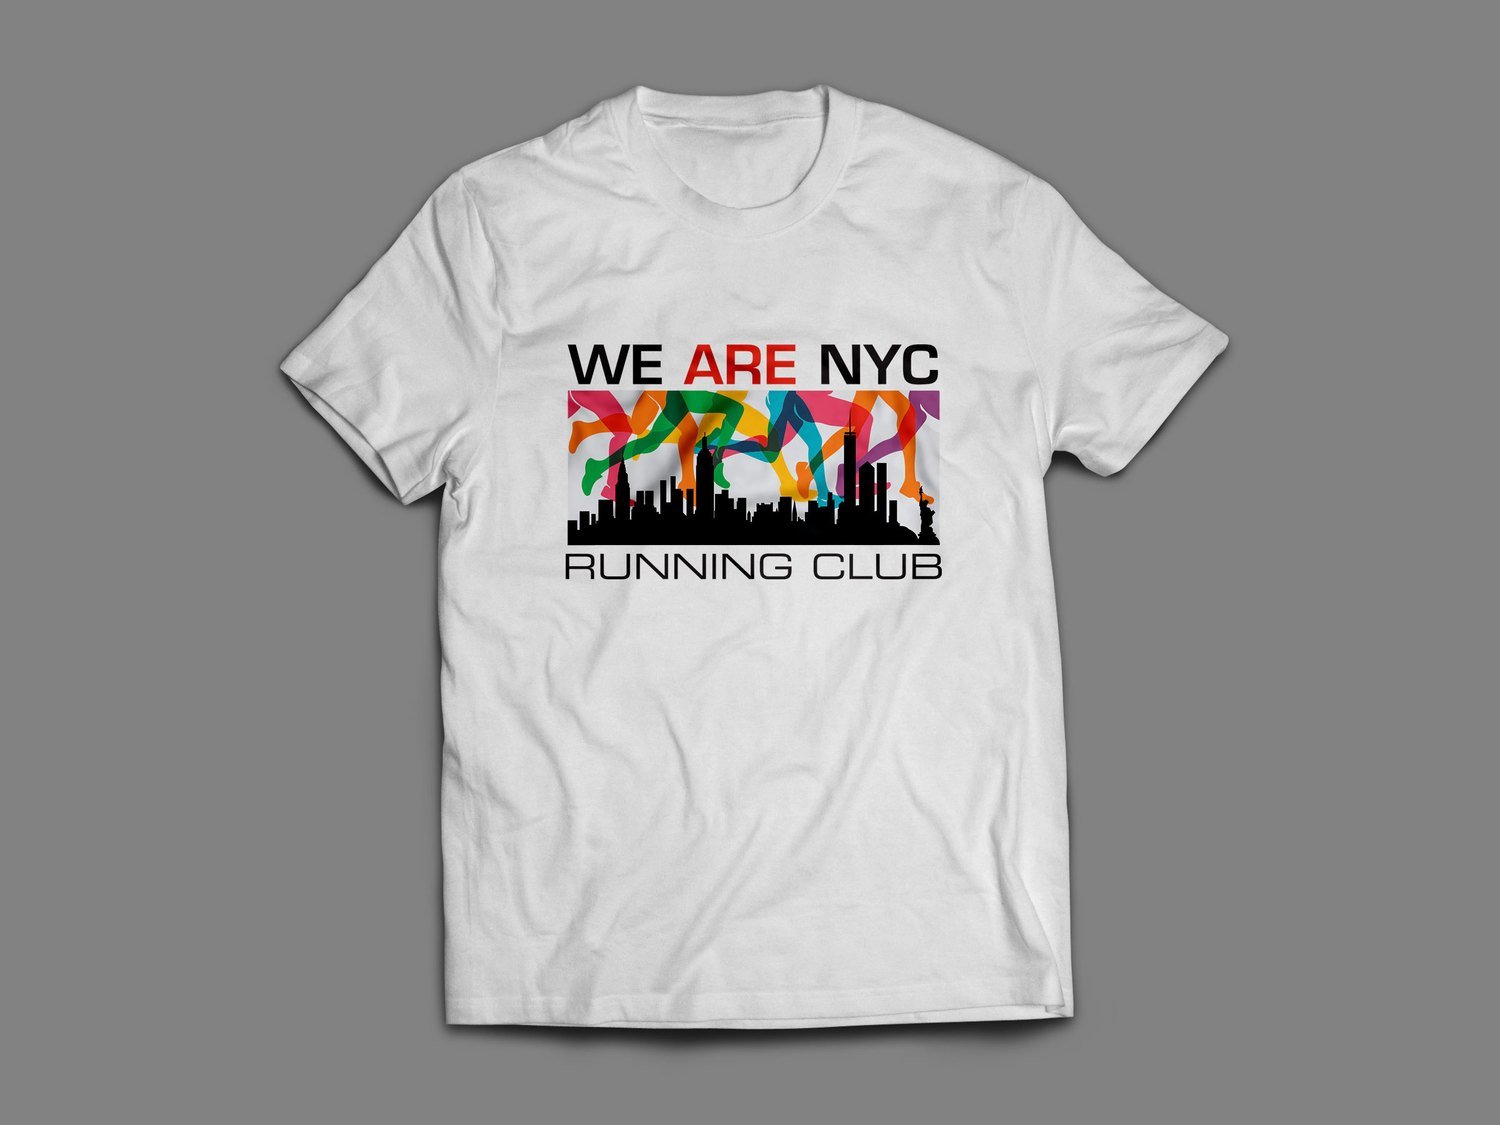 WE ARE NYC "RAINBOW LEGS" SHORT SLEEVE T-SHIRT (black or white)